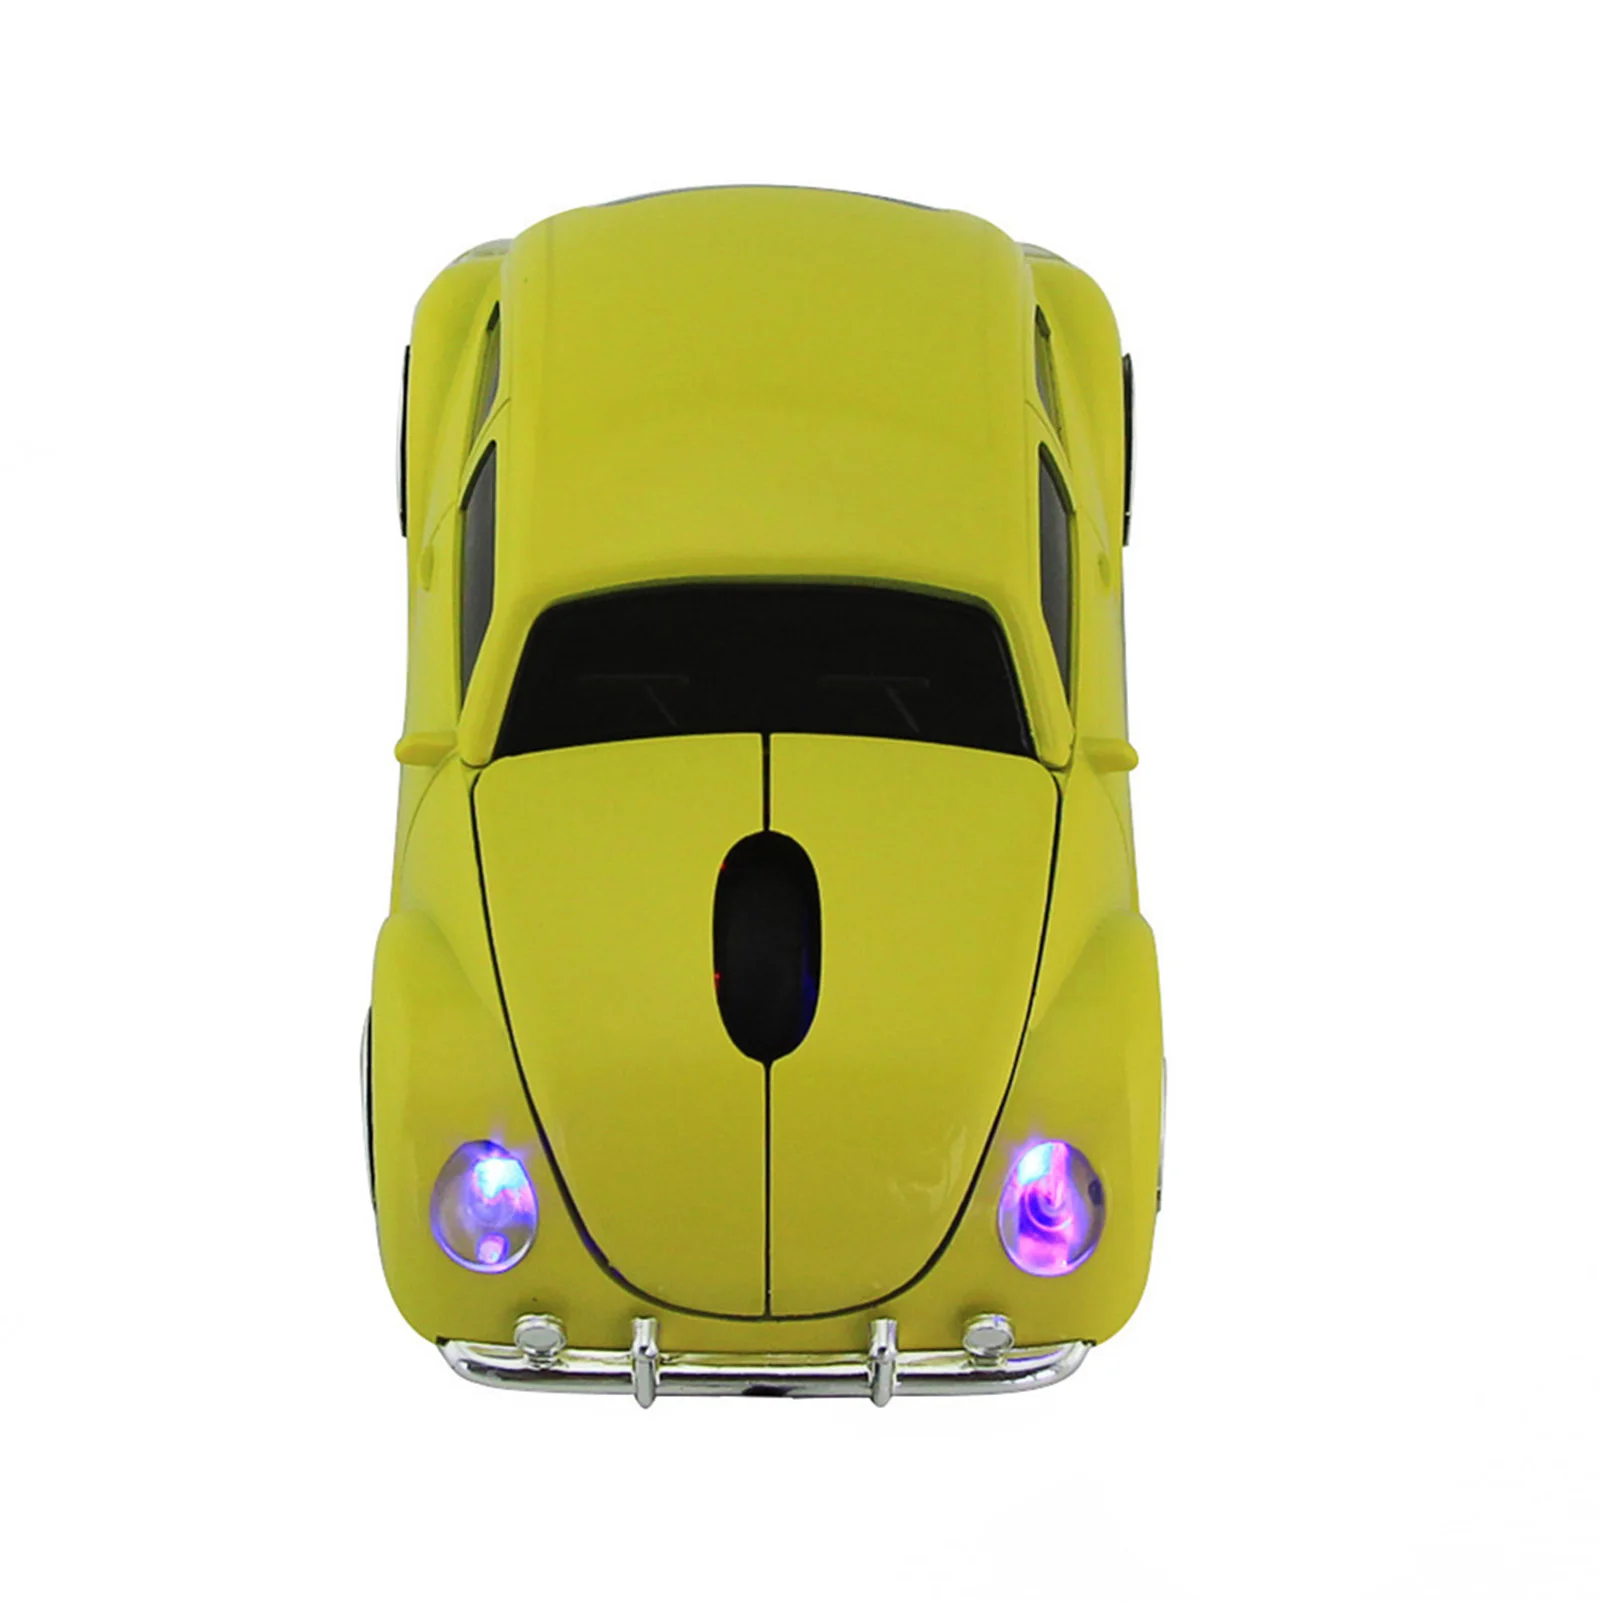 2.4Ghz Mini 1200DPI Wireless Mouse Cute Car Shape with Receiver Wireless Optical Mouse USB Scroll Mice for Tablet Laptop Compute computer mouse gaming